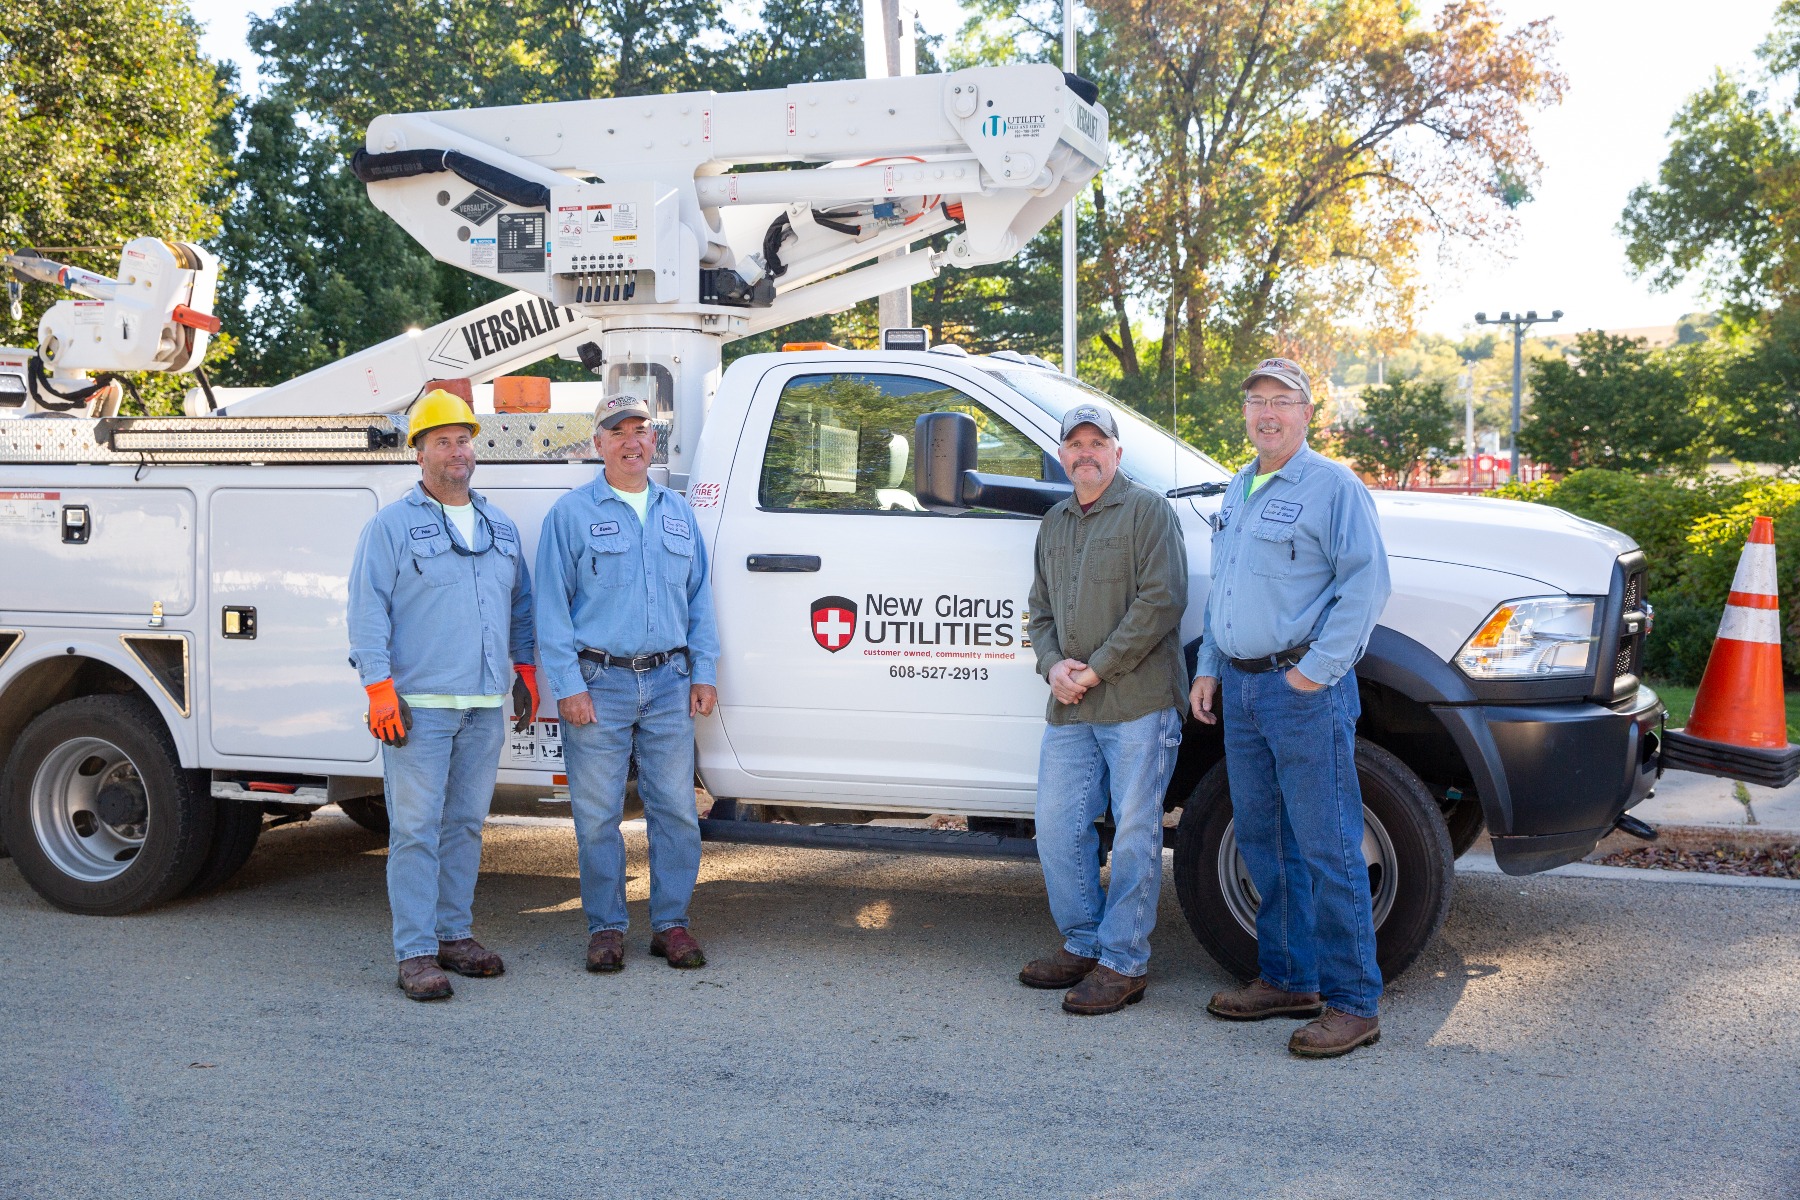 4 employees of the New Glarus utilities company pose by a truck